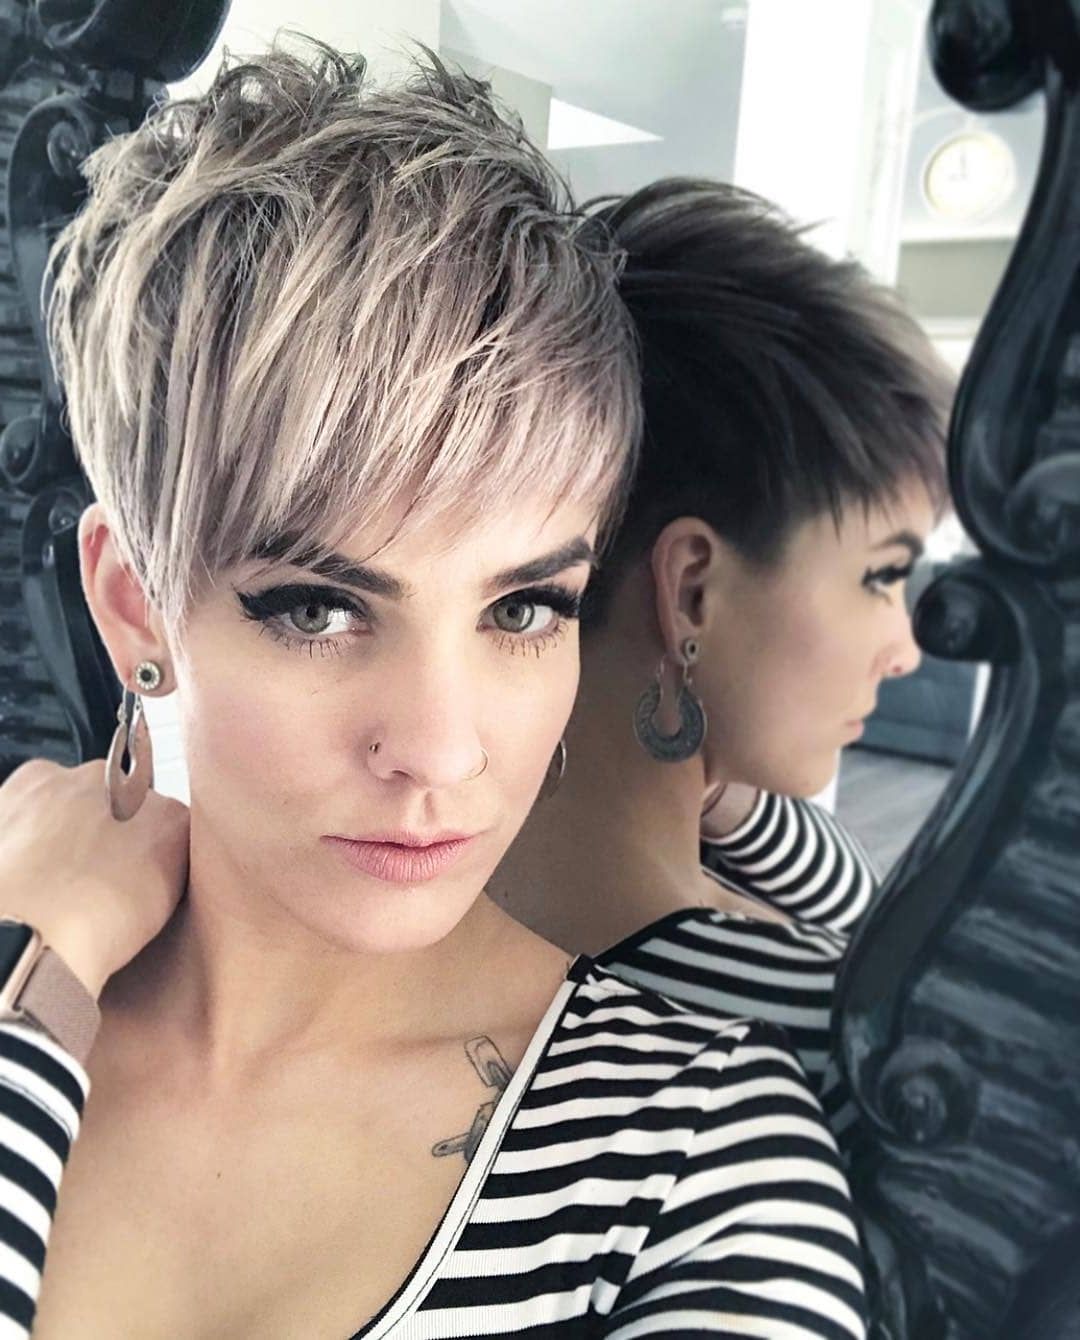 Top 10 Most Flattering Pixie Haircuts For Women, Short Hair Styles 2019 For Layered Pixie Hairstyles With An Edgy Fringe (View 7 of 20)